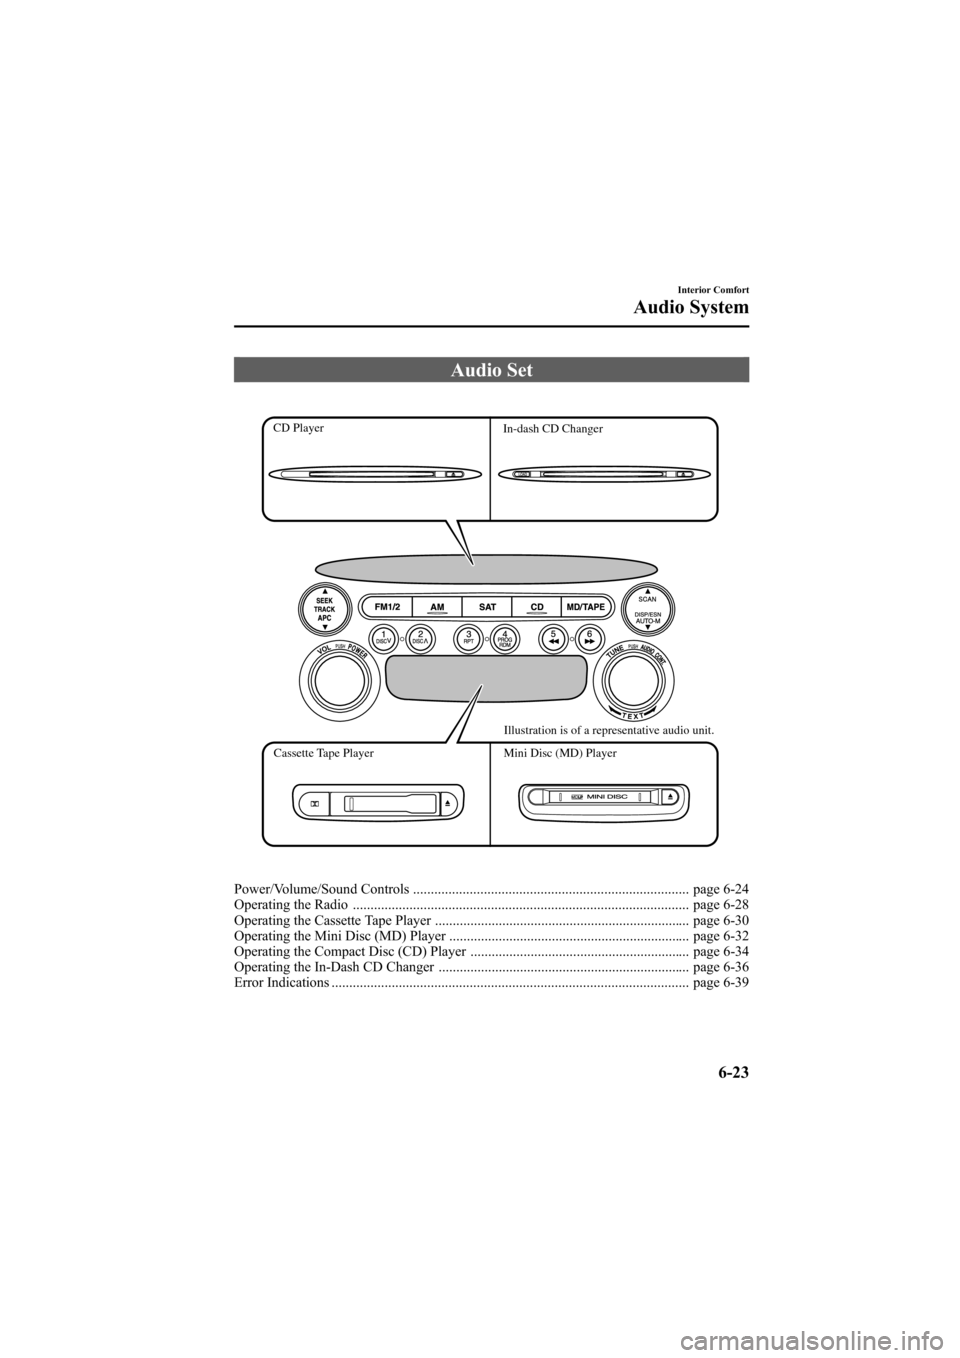 MAZDA MODEL 6 2005  Owners Manual (in English) Black plate (195,1)
Audio Set
Illustration is of a representative audio unit.
Mini Disc (MD) Player  Cassette Tape PlayerIn-dash CD Changer  CD Player
Power/Volume/Sound Controls .....................